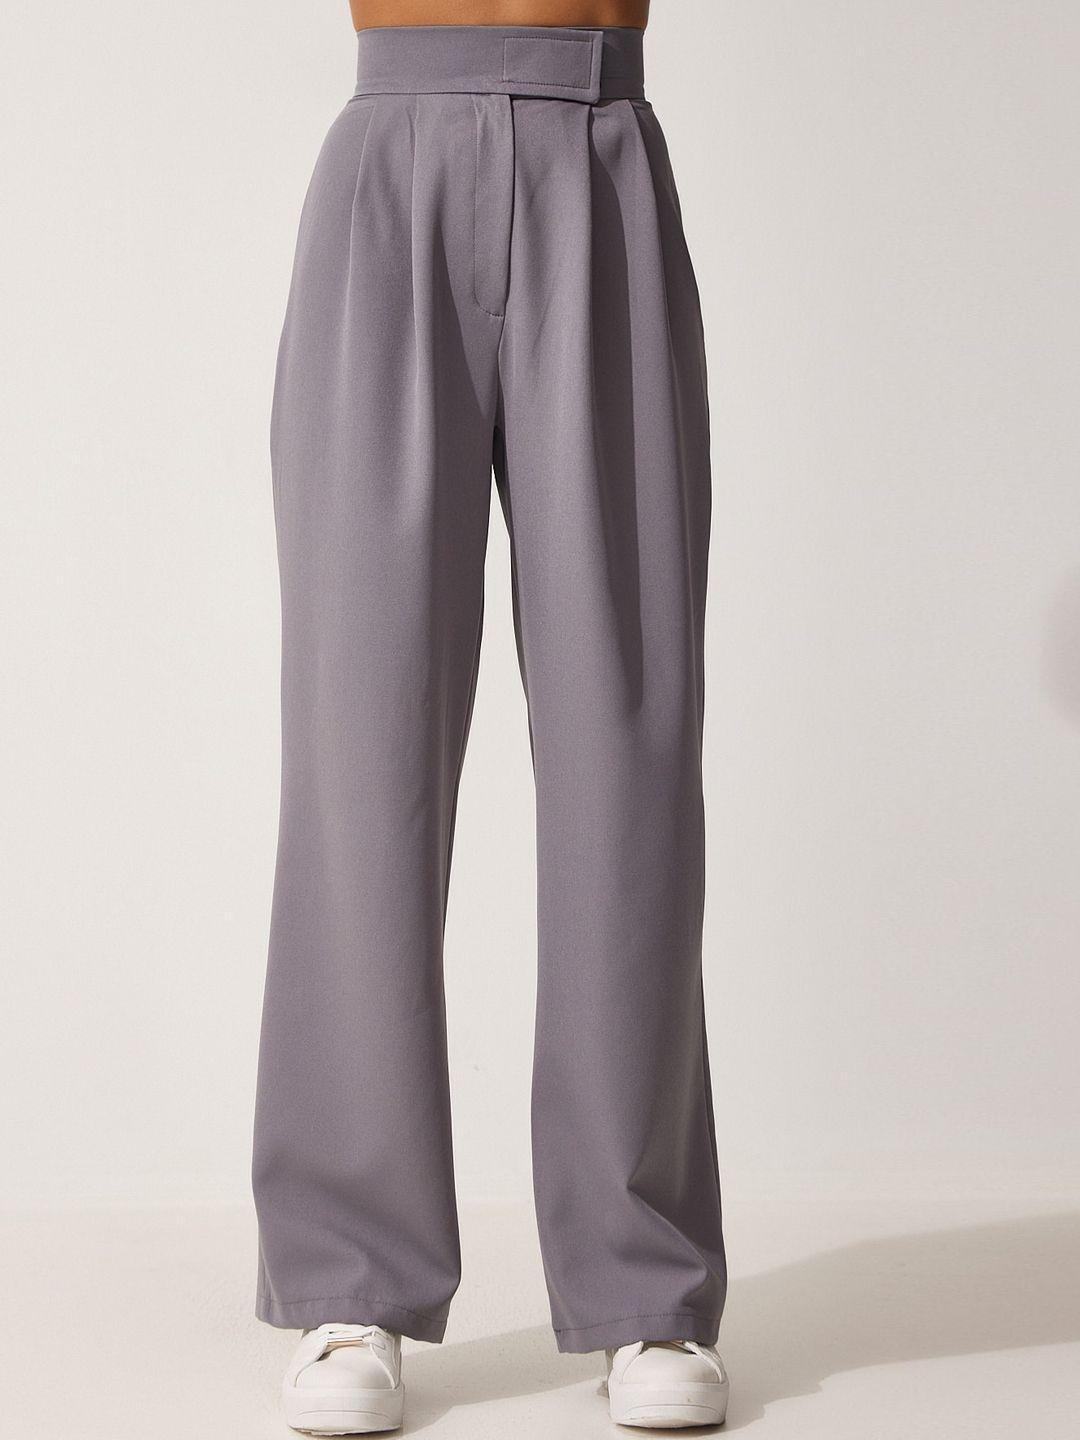 happiness istanbul women pleated trousers